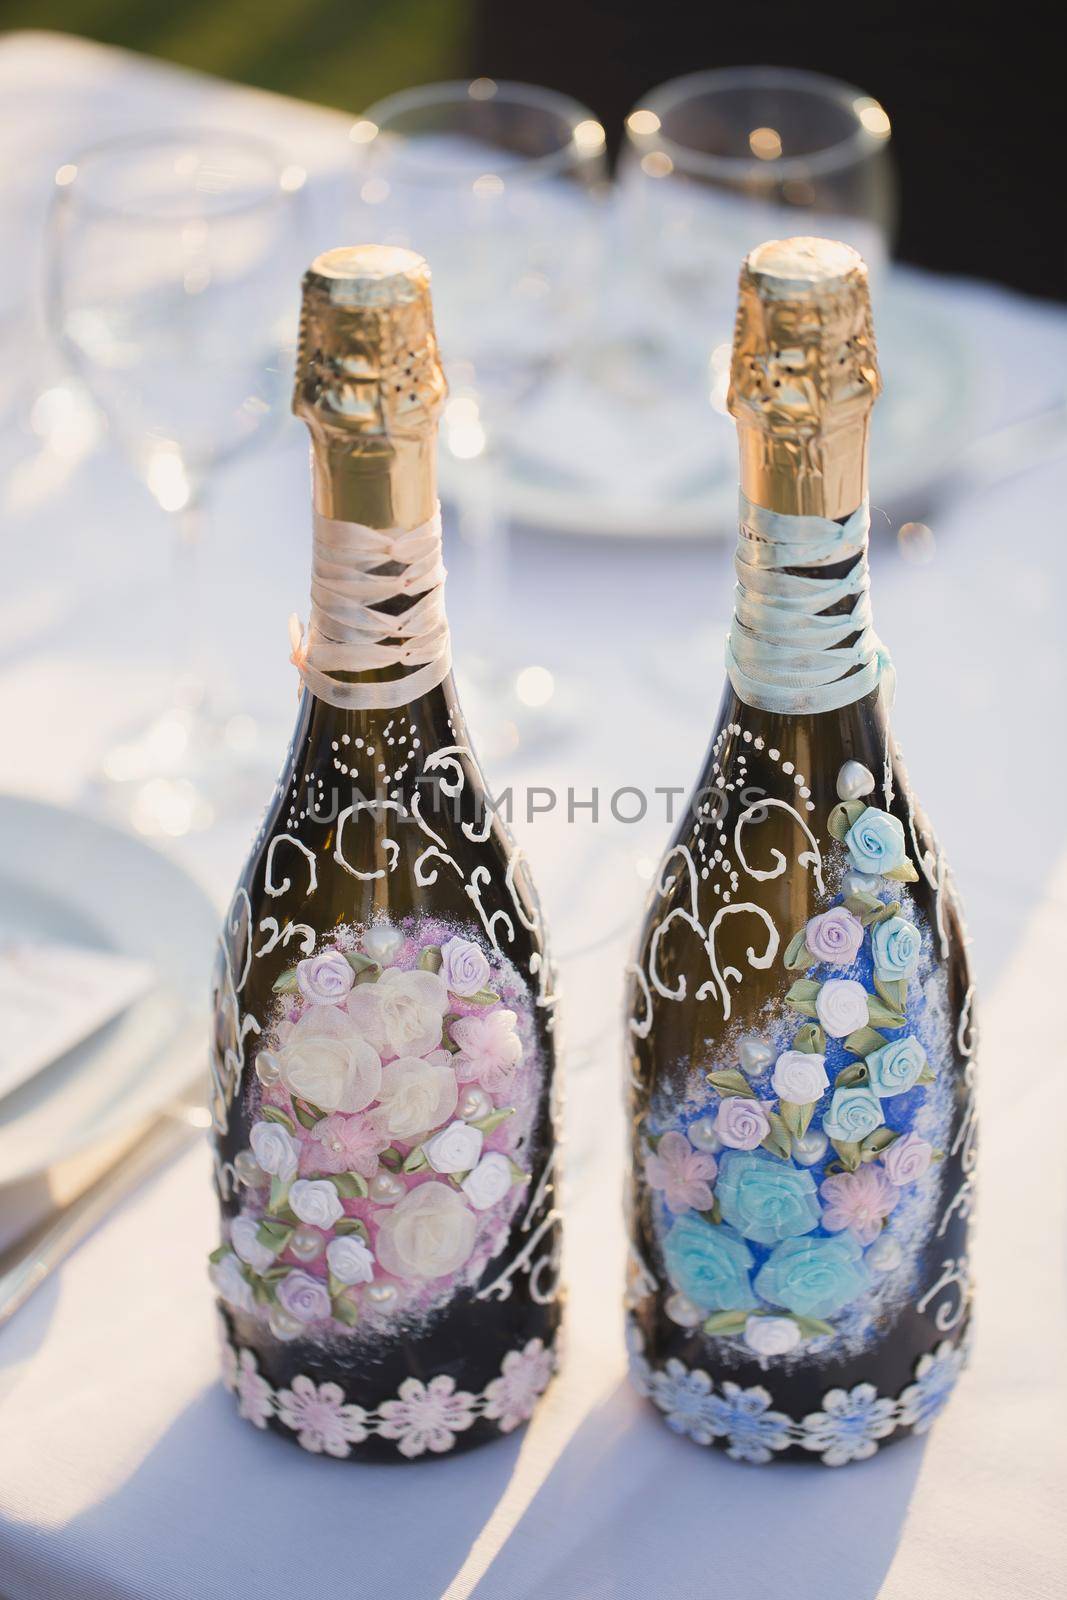 Decoration of a bottle of champagne and sparkling wine on table. Wedding decor.